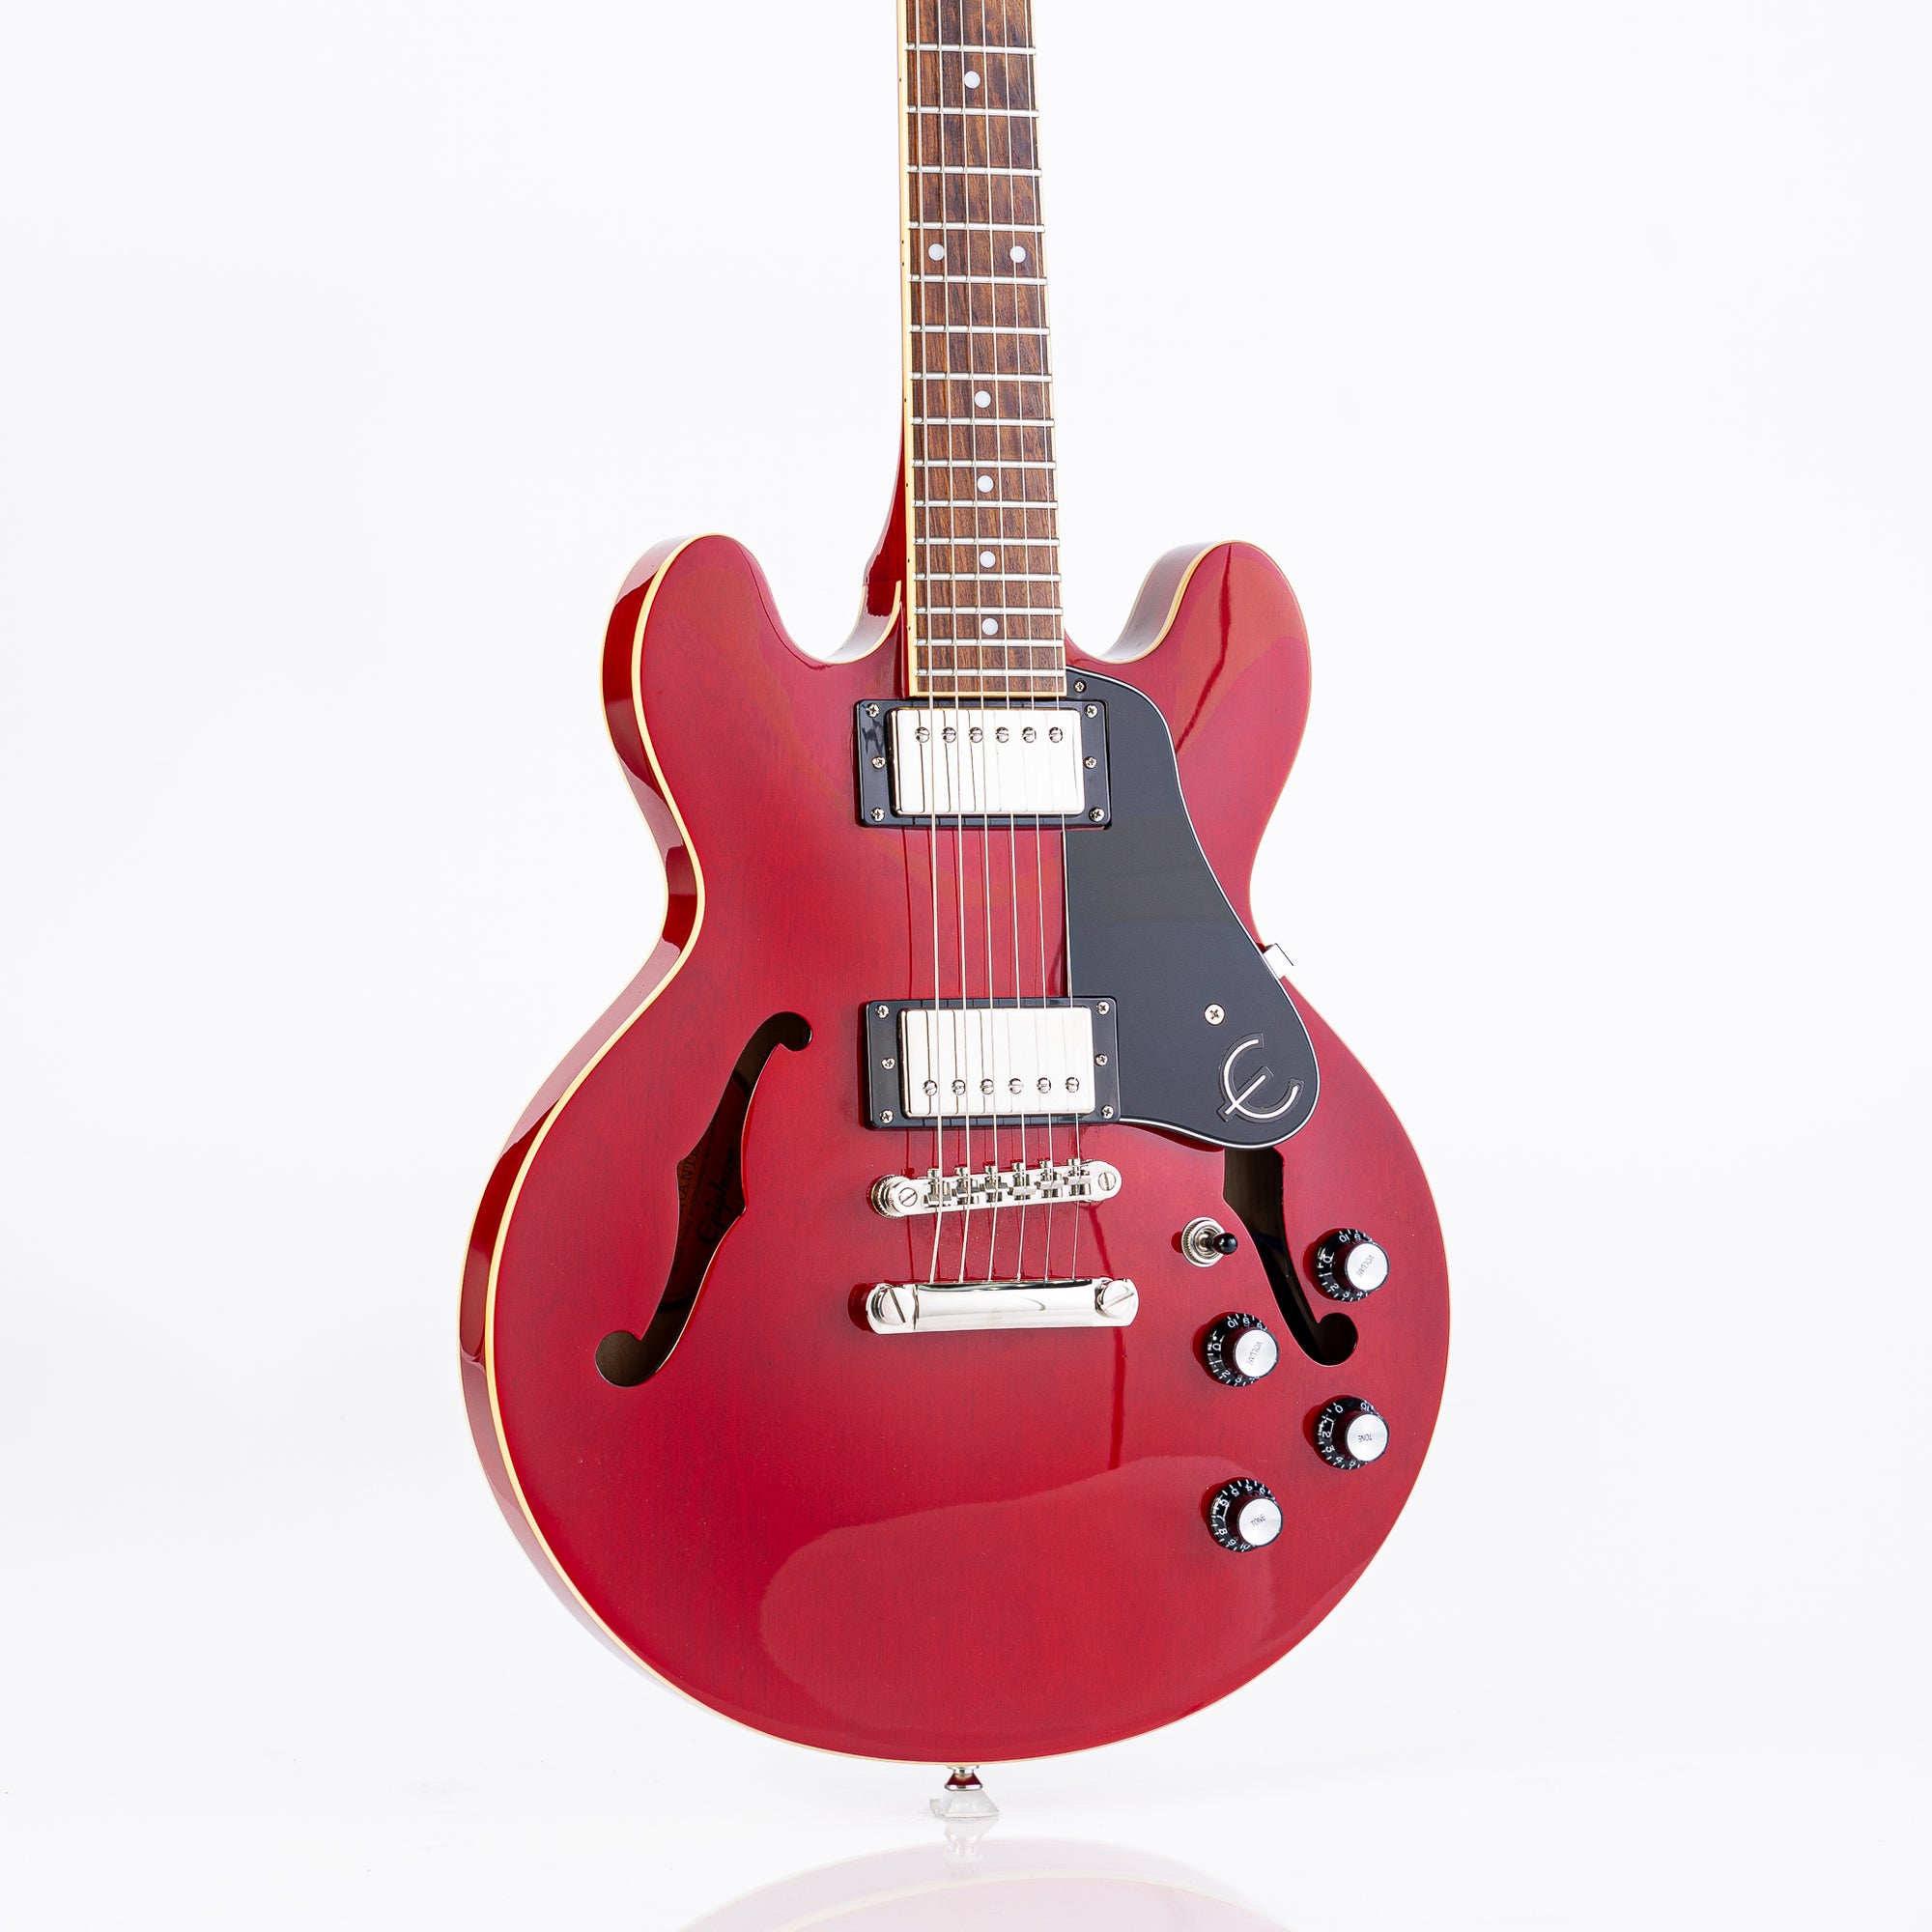 USED Epiphone ES-339 Semi-Hollow Electric Guitar- Cherry Red with Hardshell Case